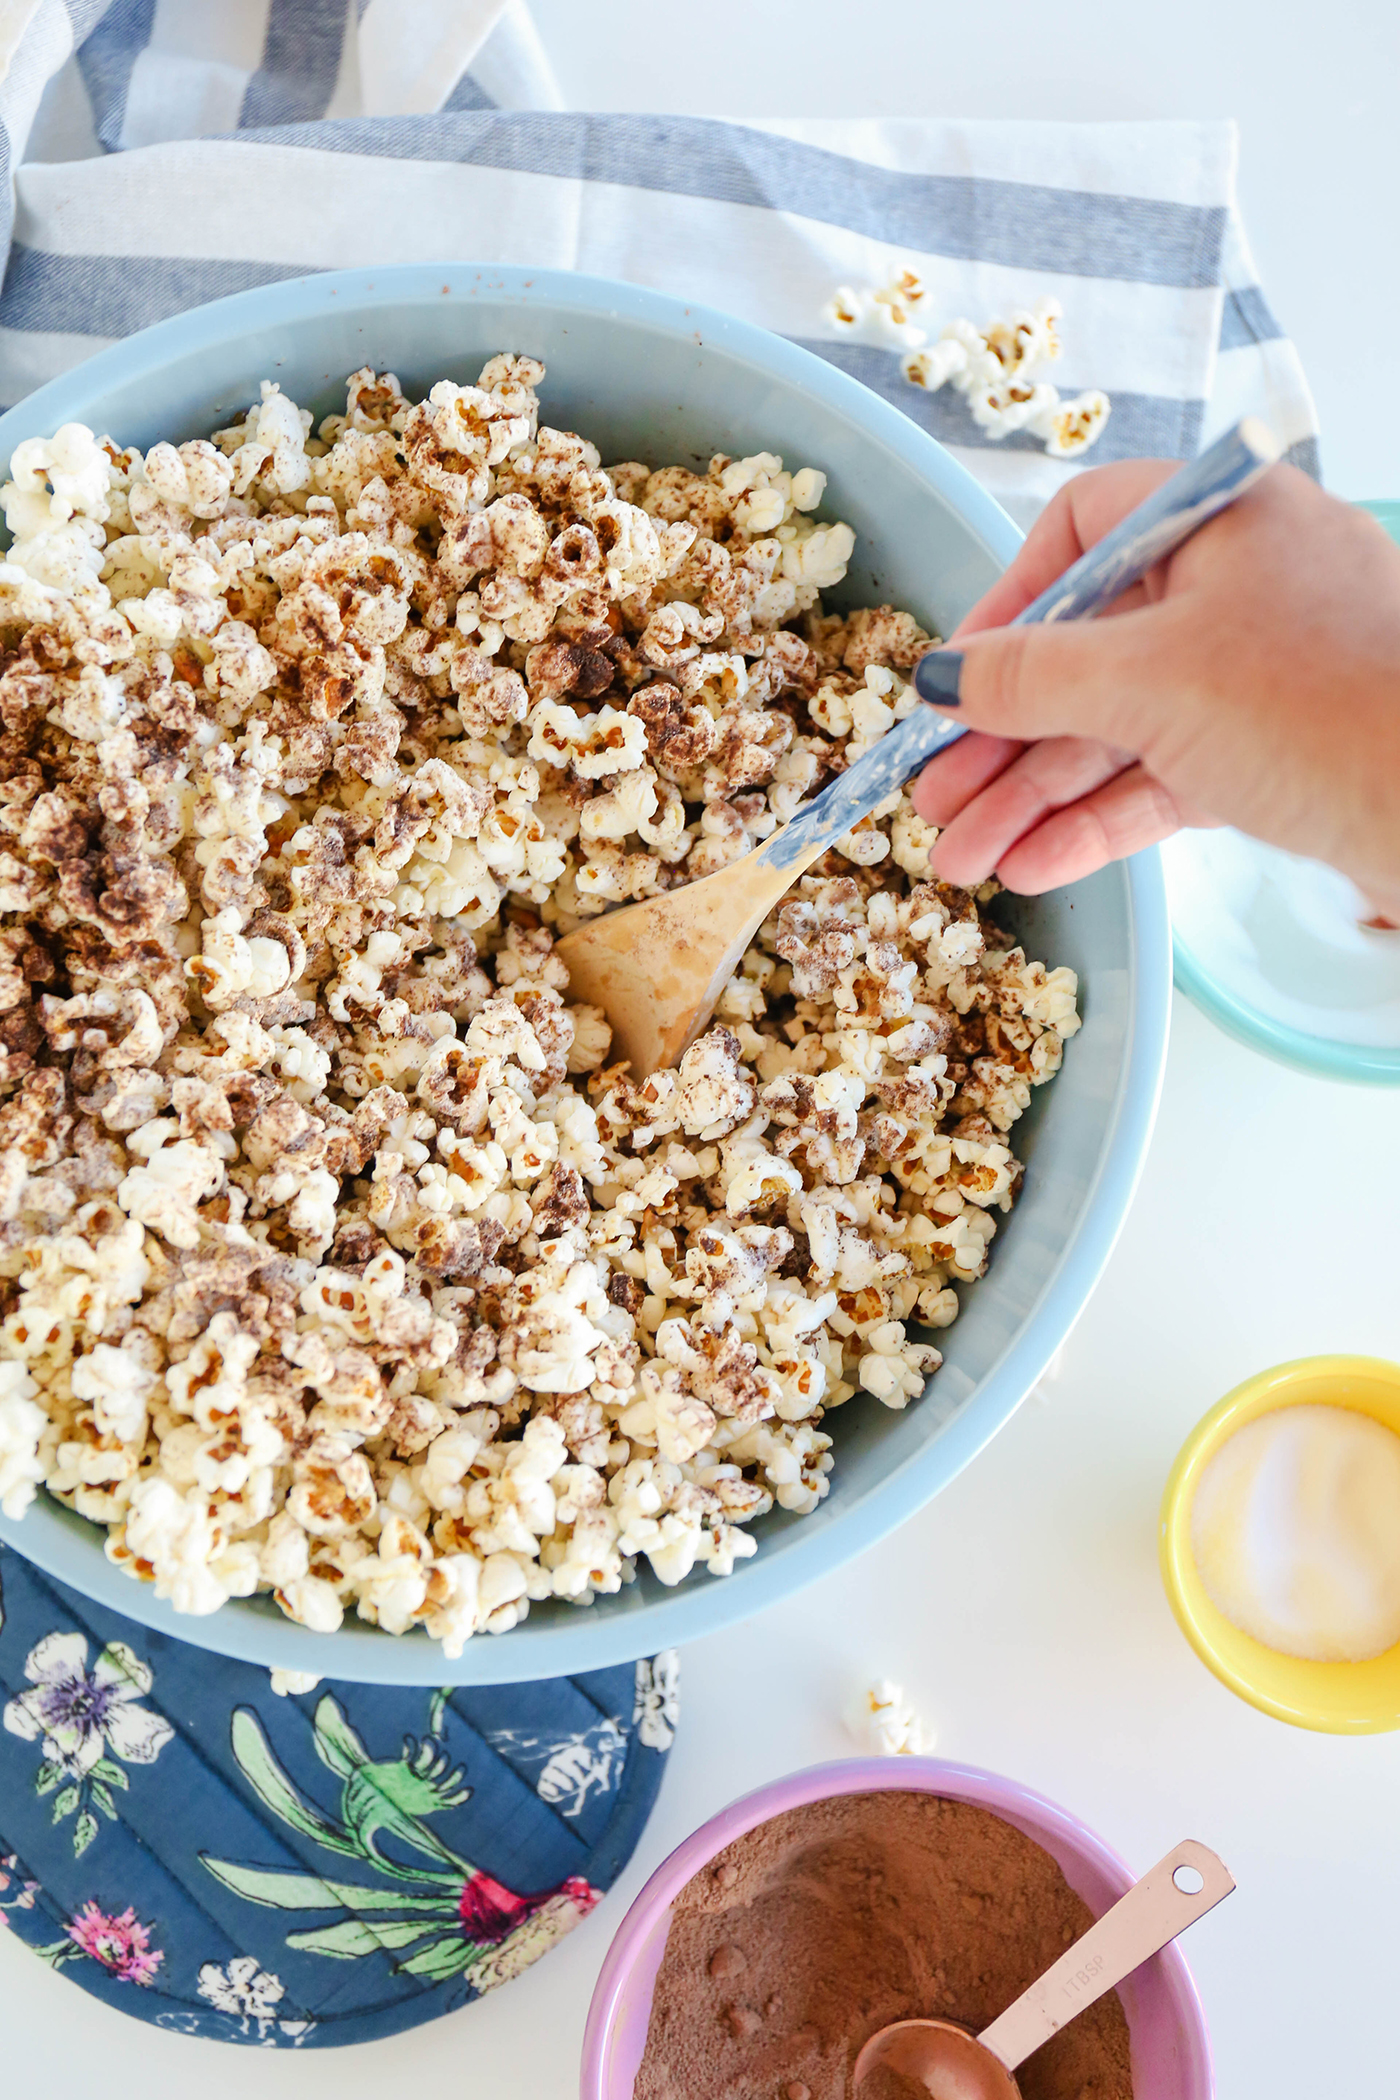 SkinnyPop Popcorn Recipe with Apples, Pecans, and Rosemary